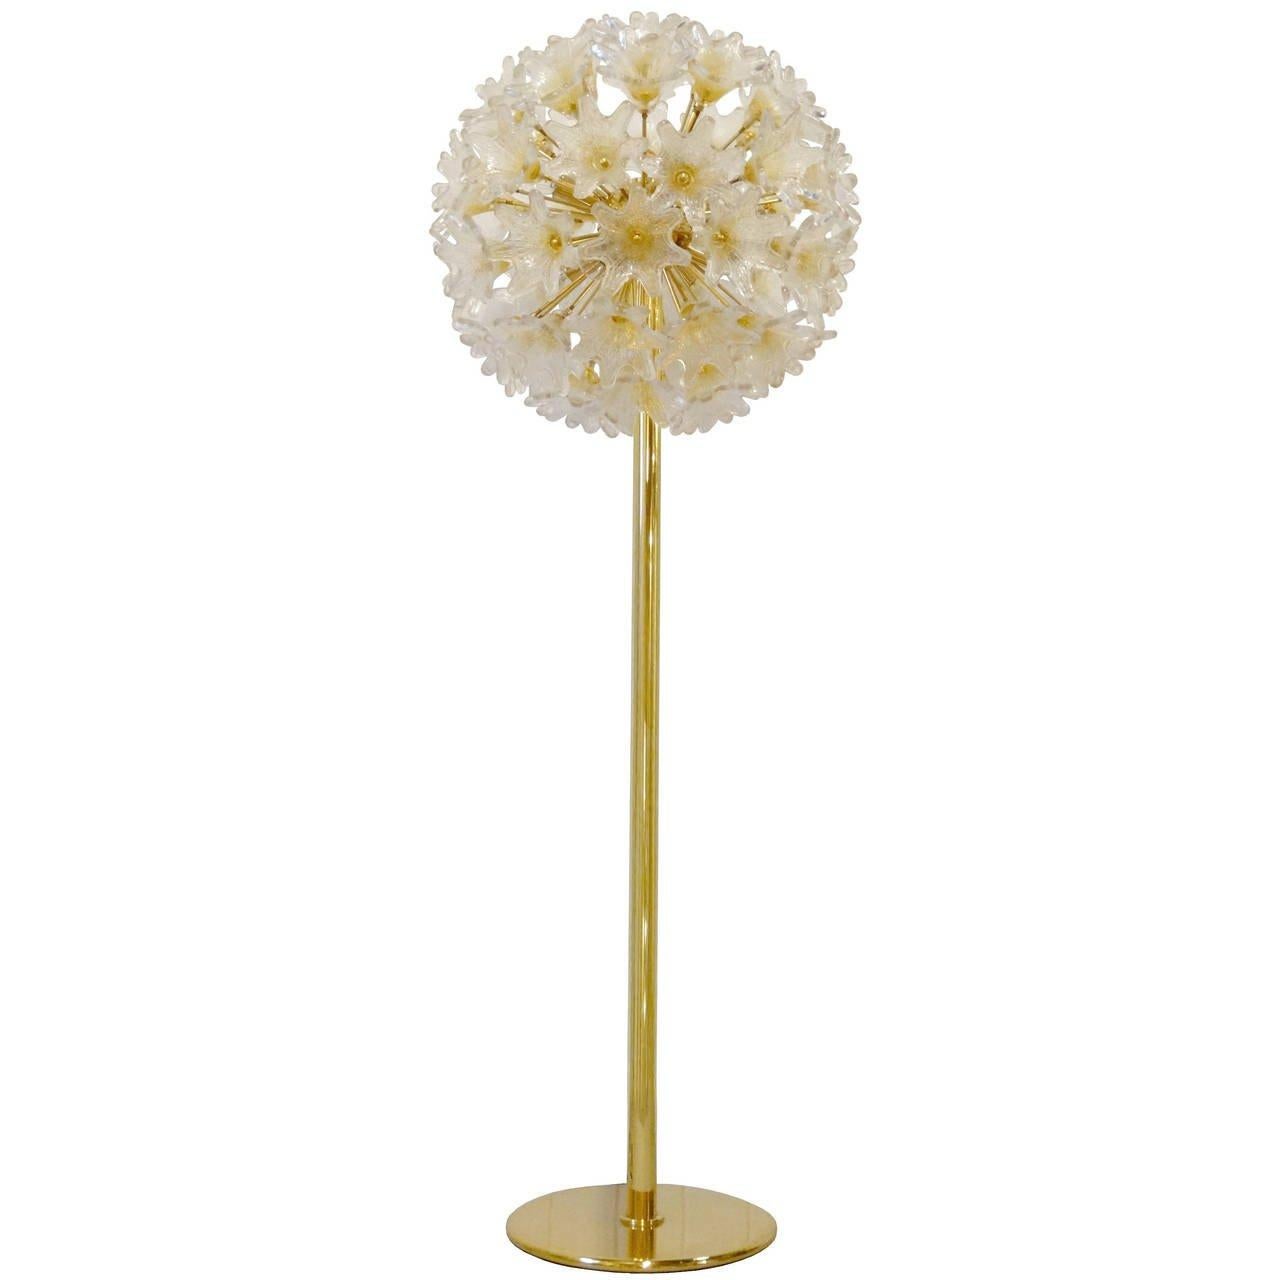 Pair of Murano Glass Flower Ball Floor Lamp In Excellent Condition For Sale In New York, NY